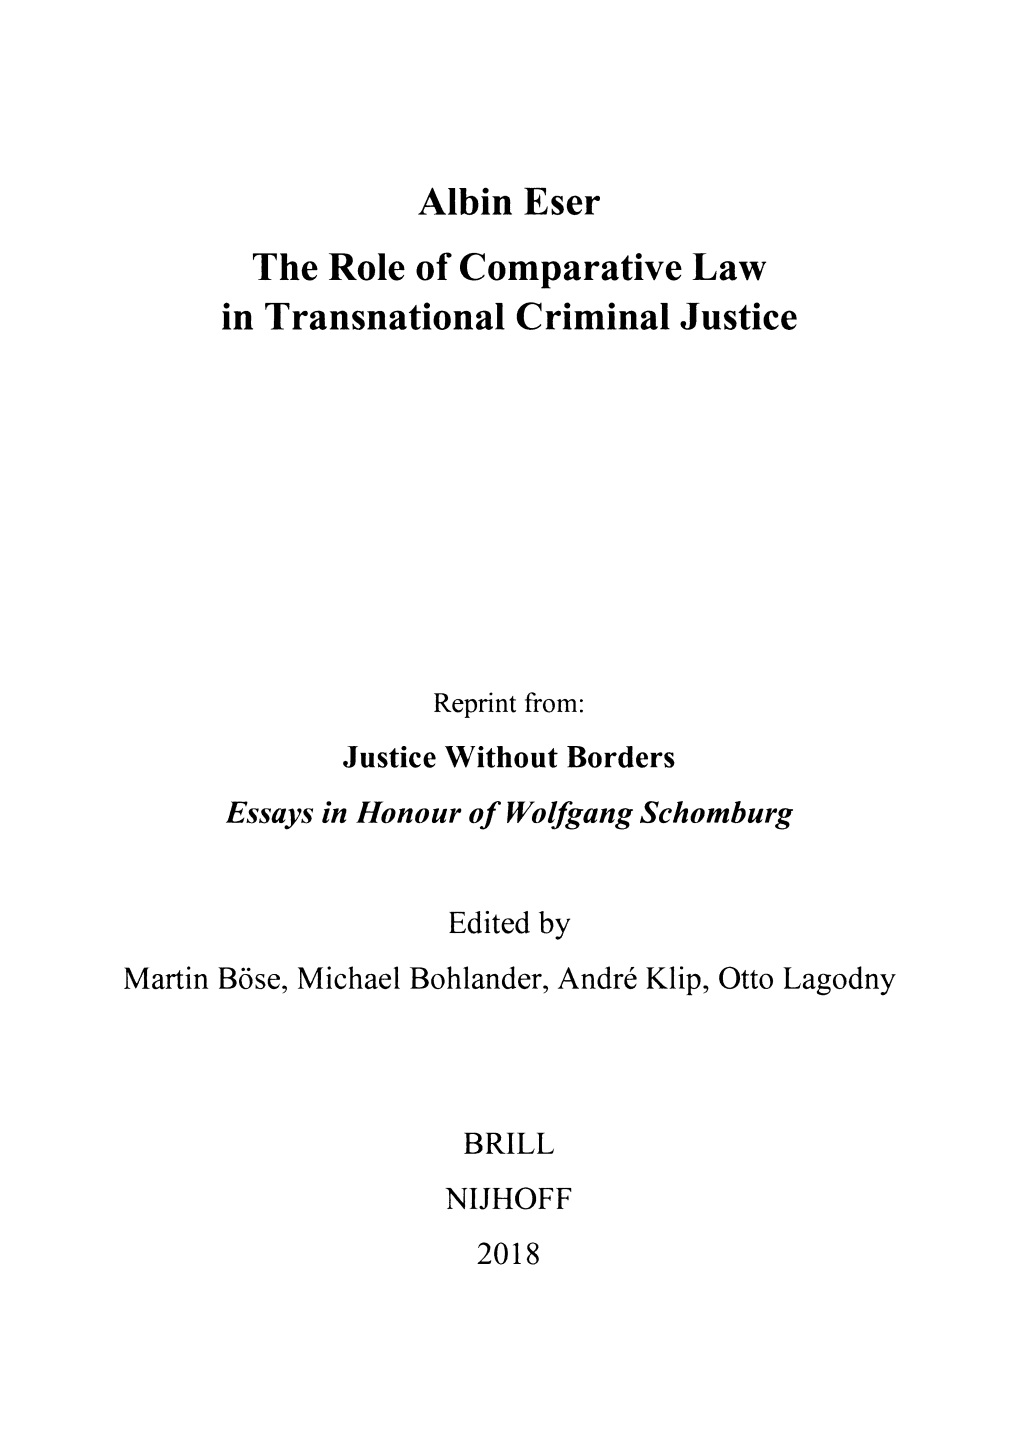 Albin Eser the Role of Comparative Law in Transnational Criminal Justice